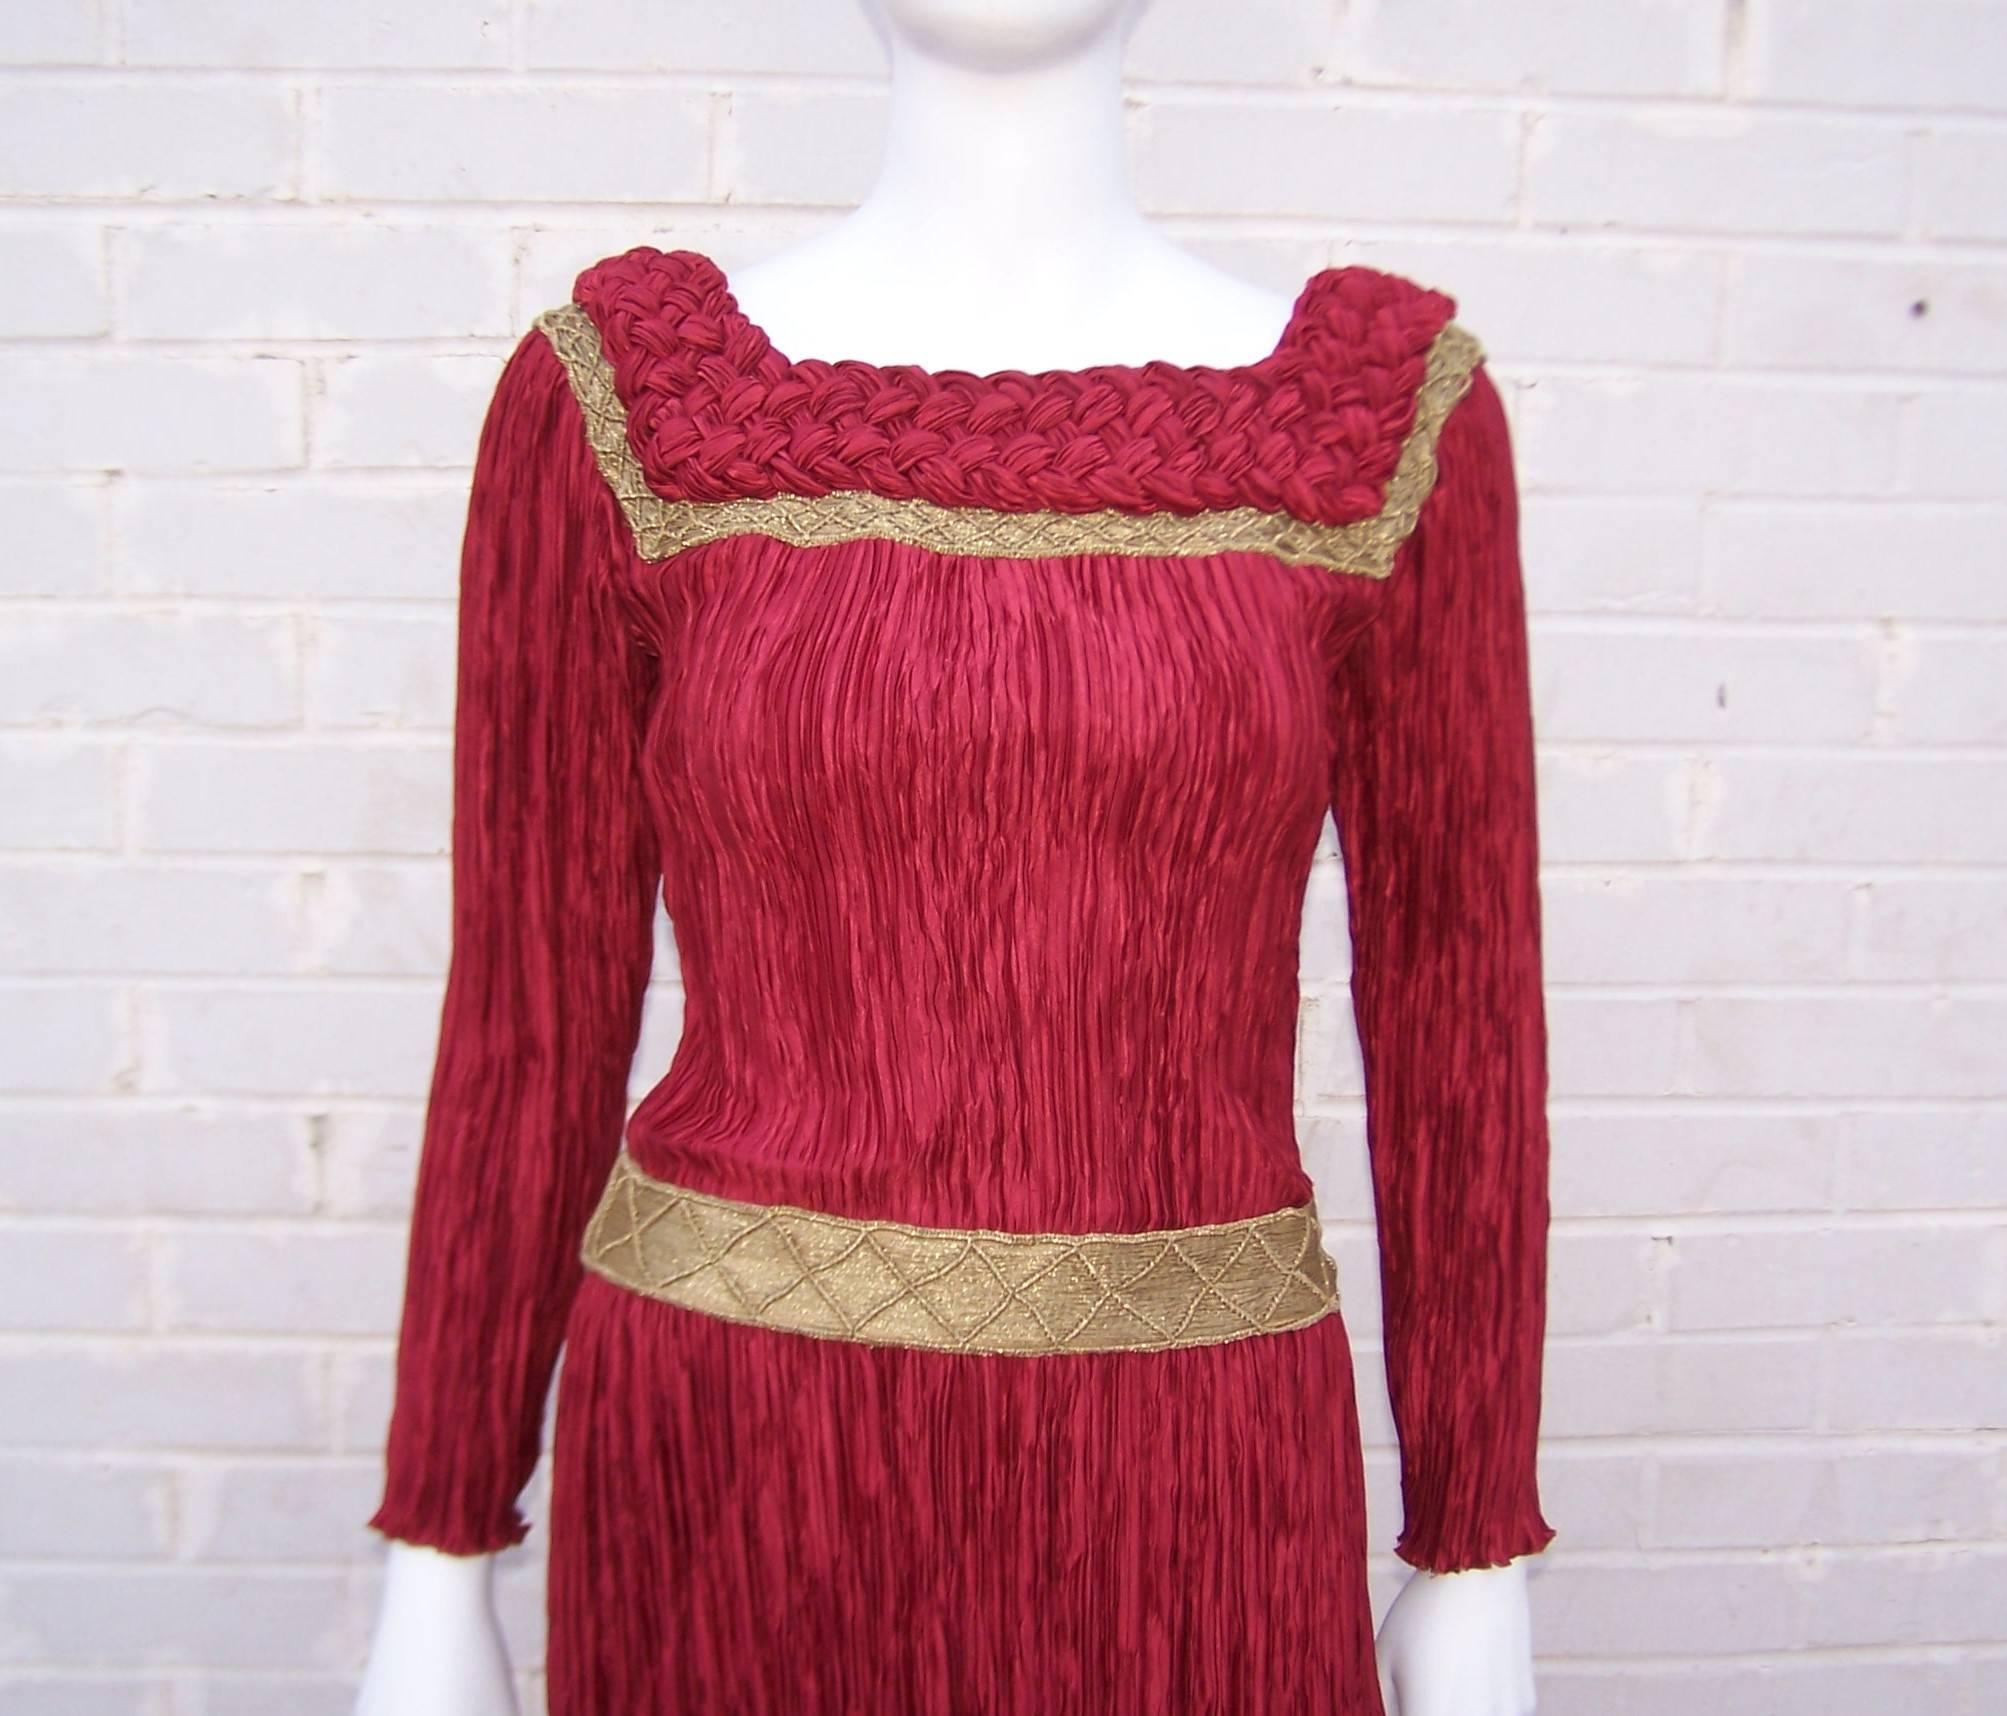 This gorgeous burgundy red dress by Mary McFadden conjures up images of romanticism and King Arthur's court.  Ms. McFadden's signature micro pleated fabric is a nod to the feminine designs of Mario Fortuny and is sure to show off your best assets. 